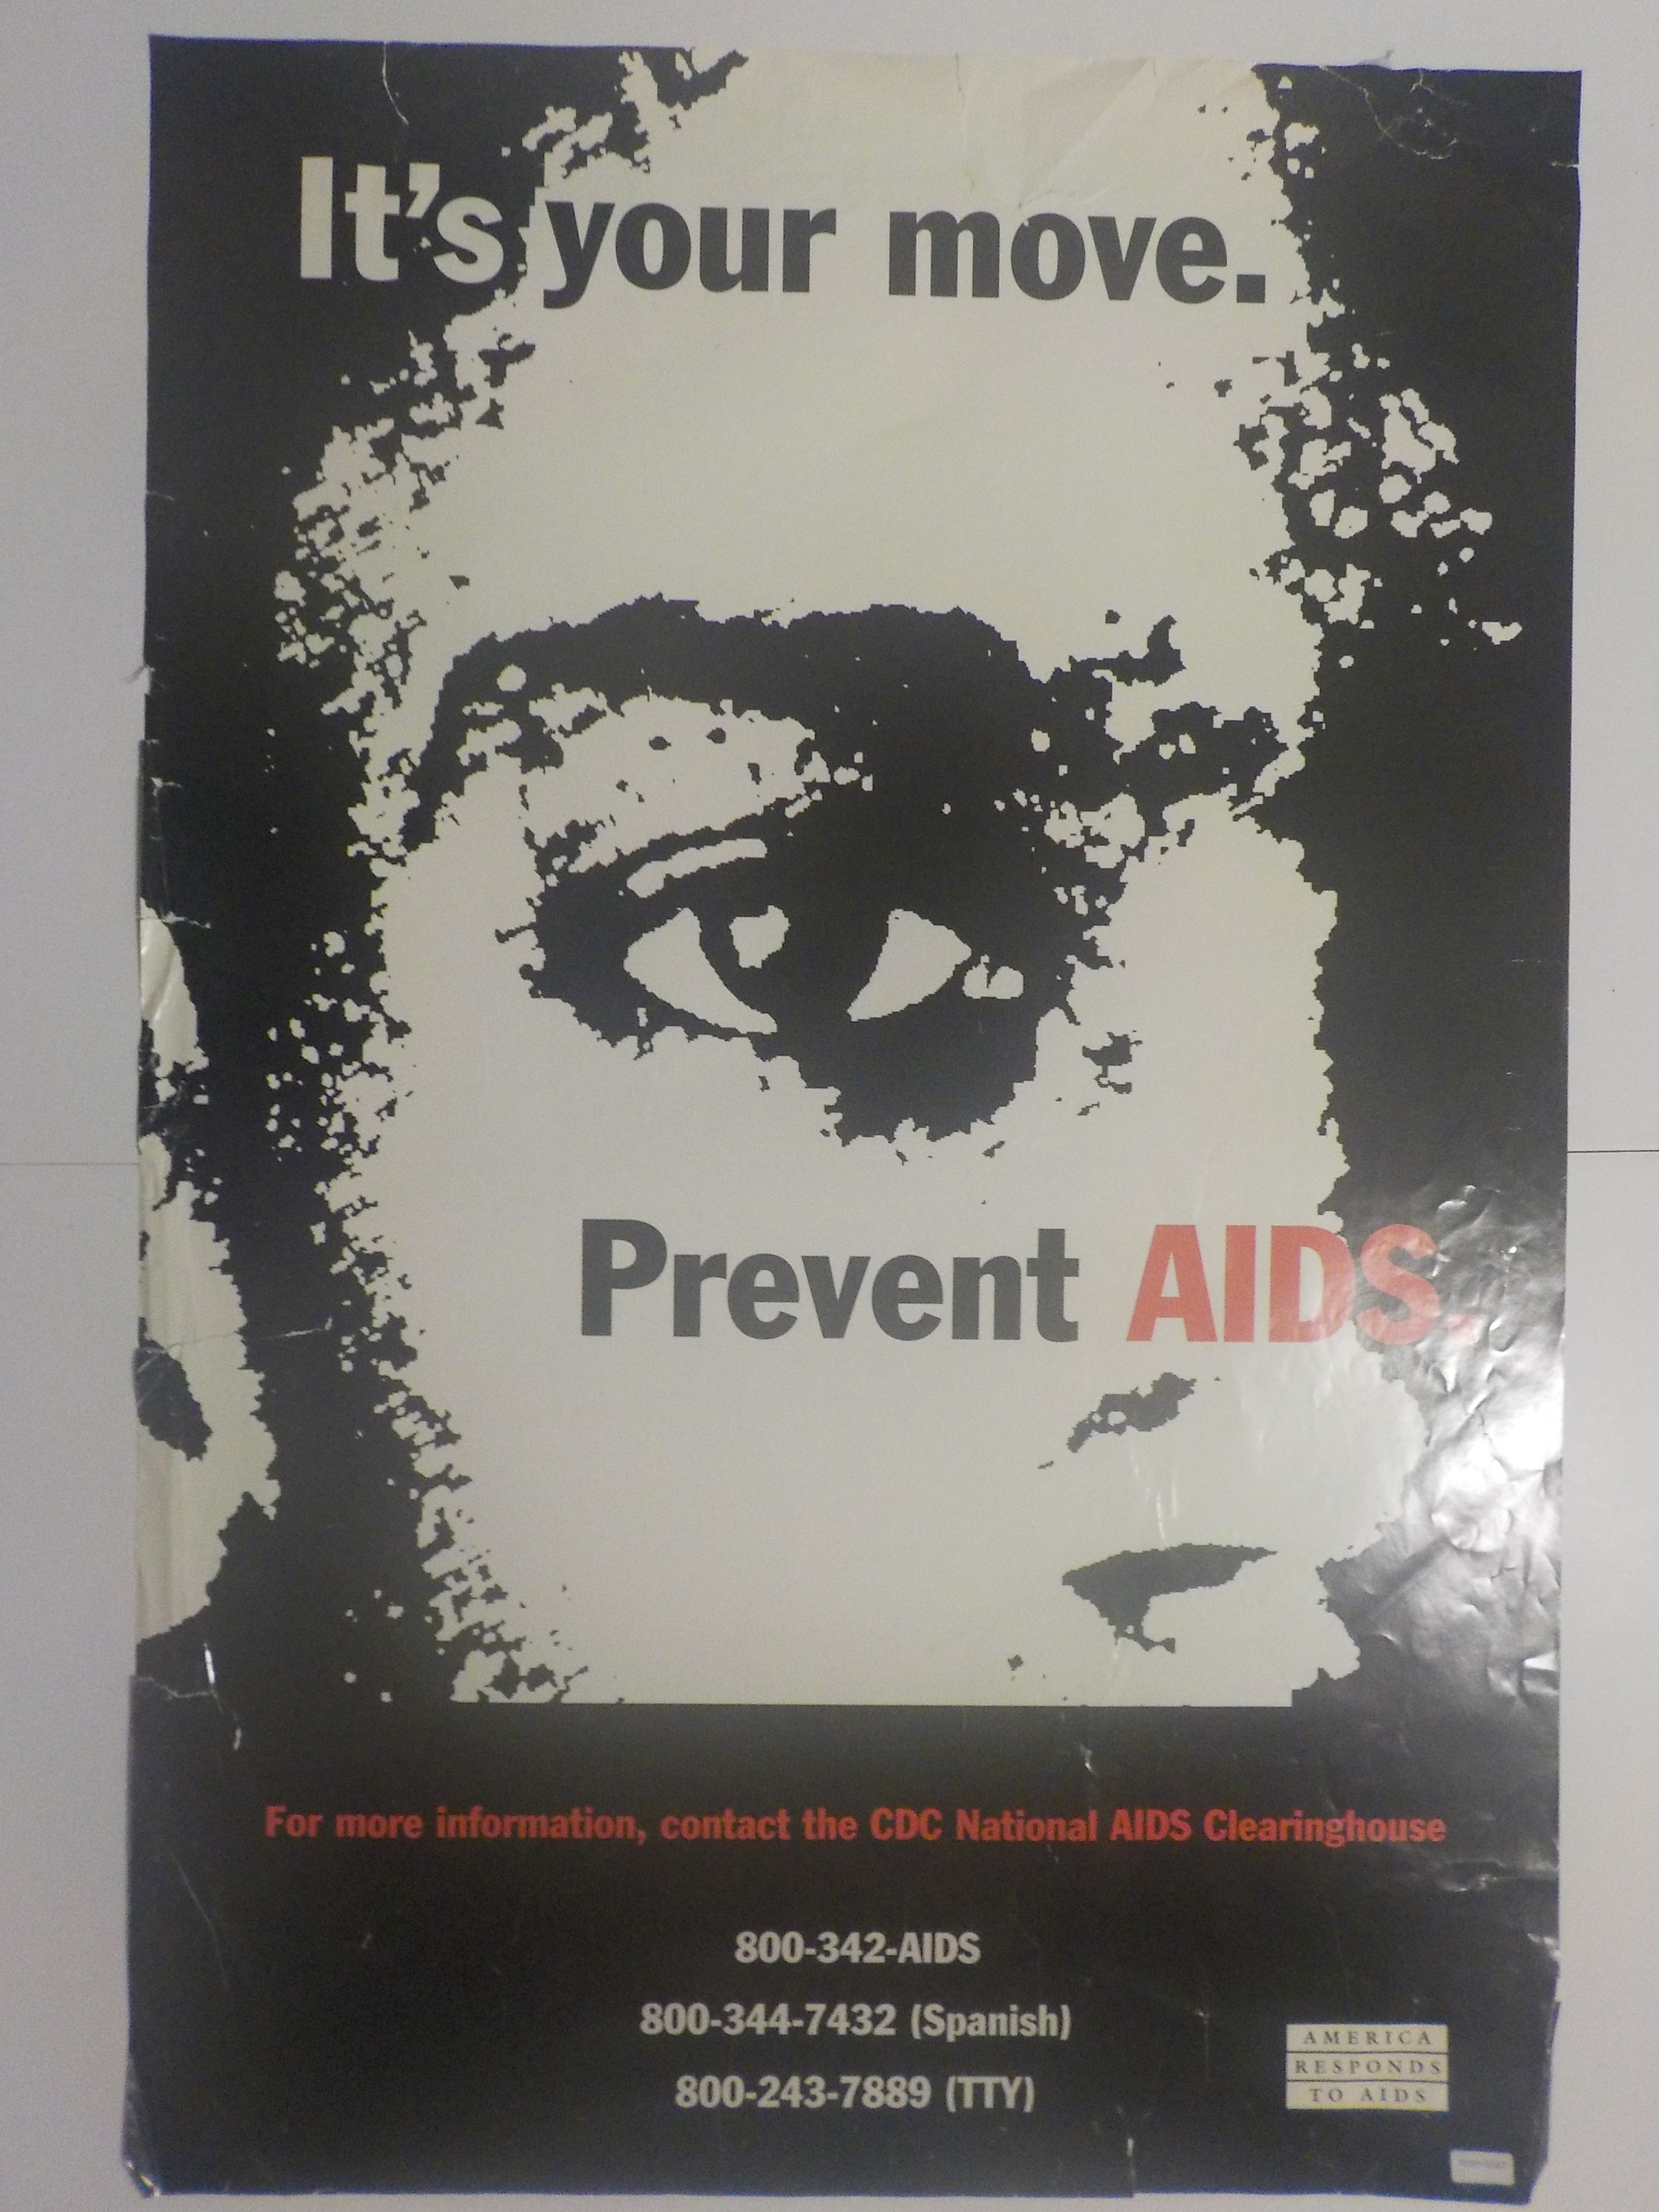 It's your move. Prevent AIDS